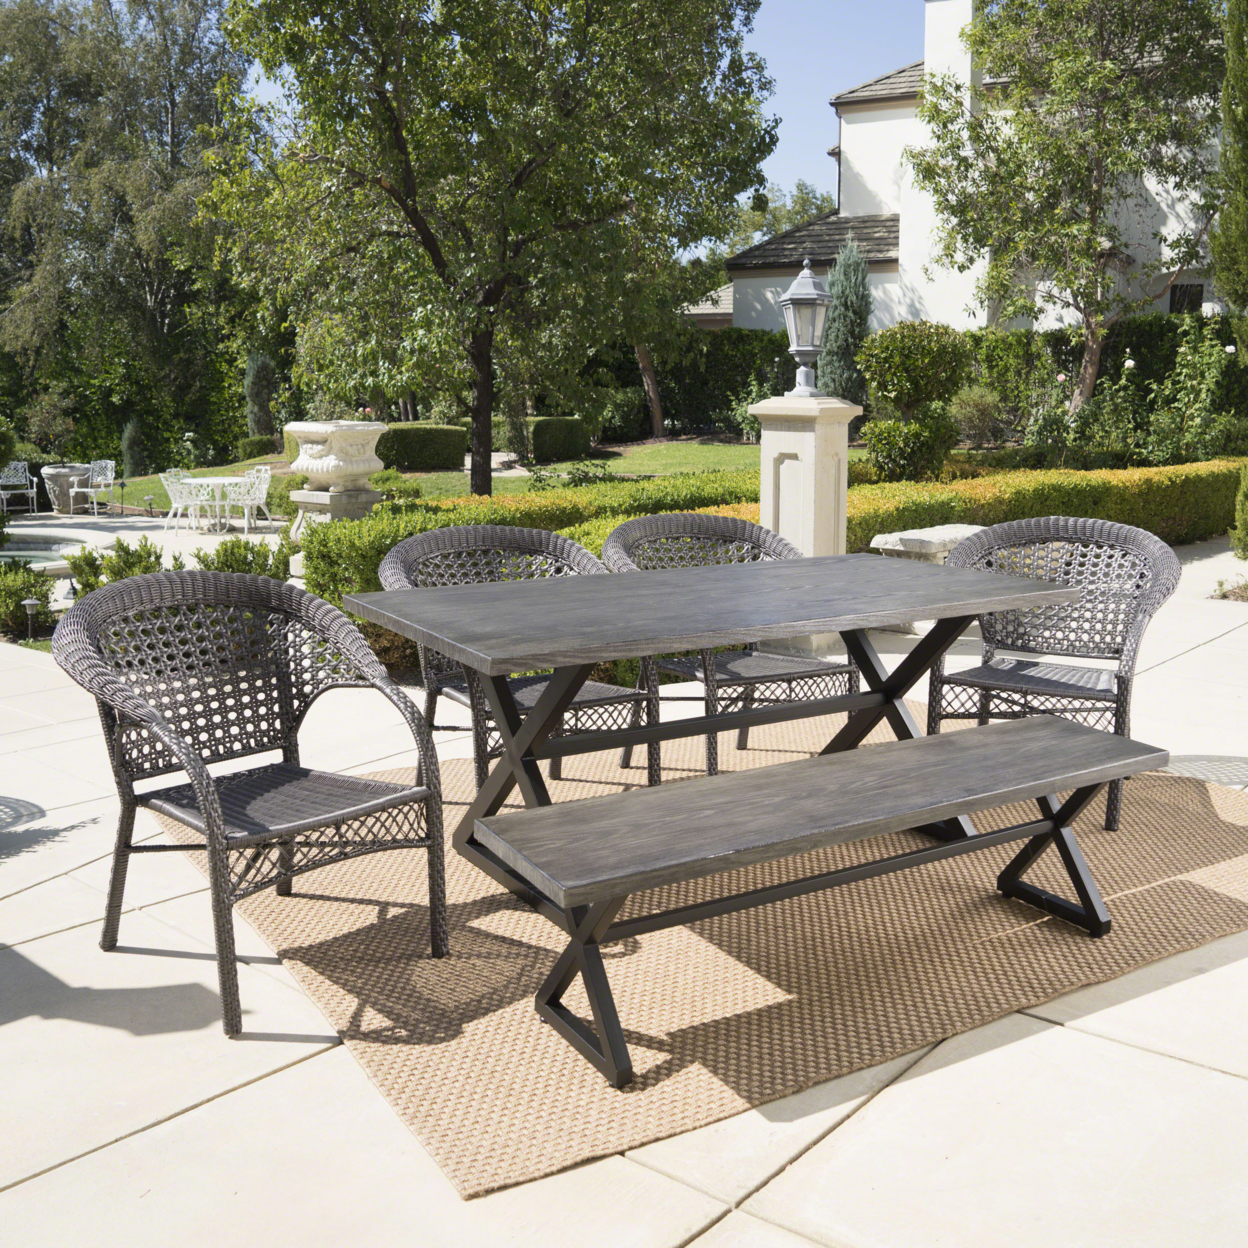 Keness Outdoor 6 Piece Aluminum Dining Set With Bench And Wicker Stacking Chairs - Black/Multi-brown